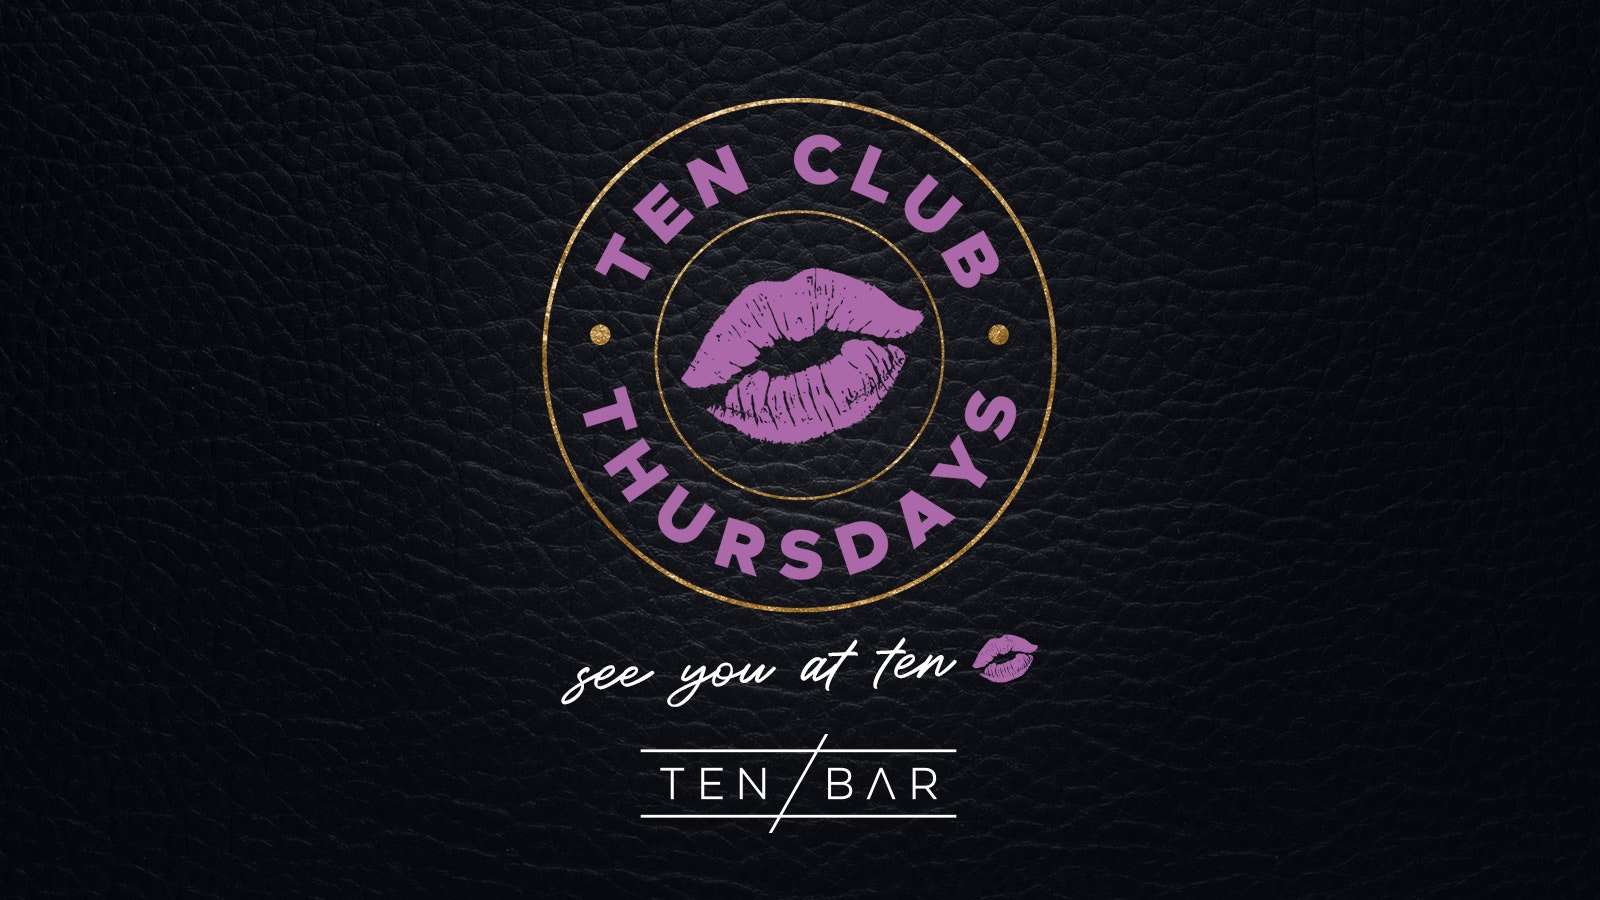 Ten Club Thursdays (Members Exclusive Drinks Deals Wristband) Free Entry all night long, Open from 10pm – 22nd December